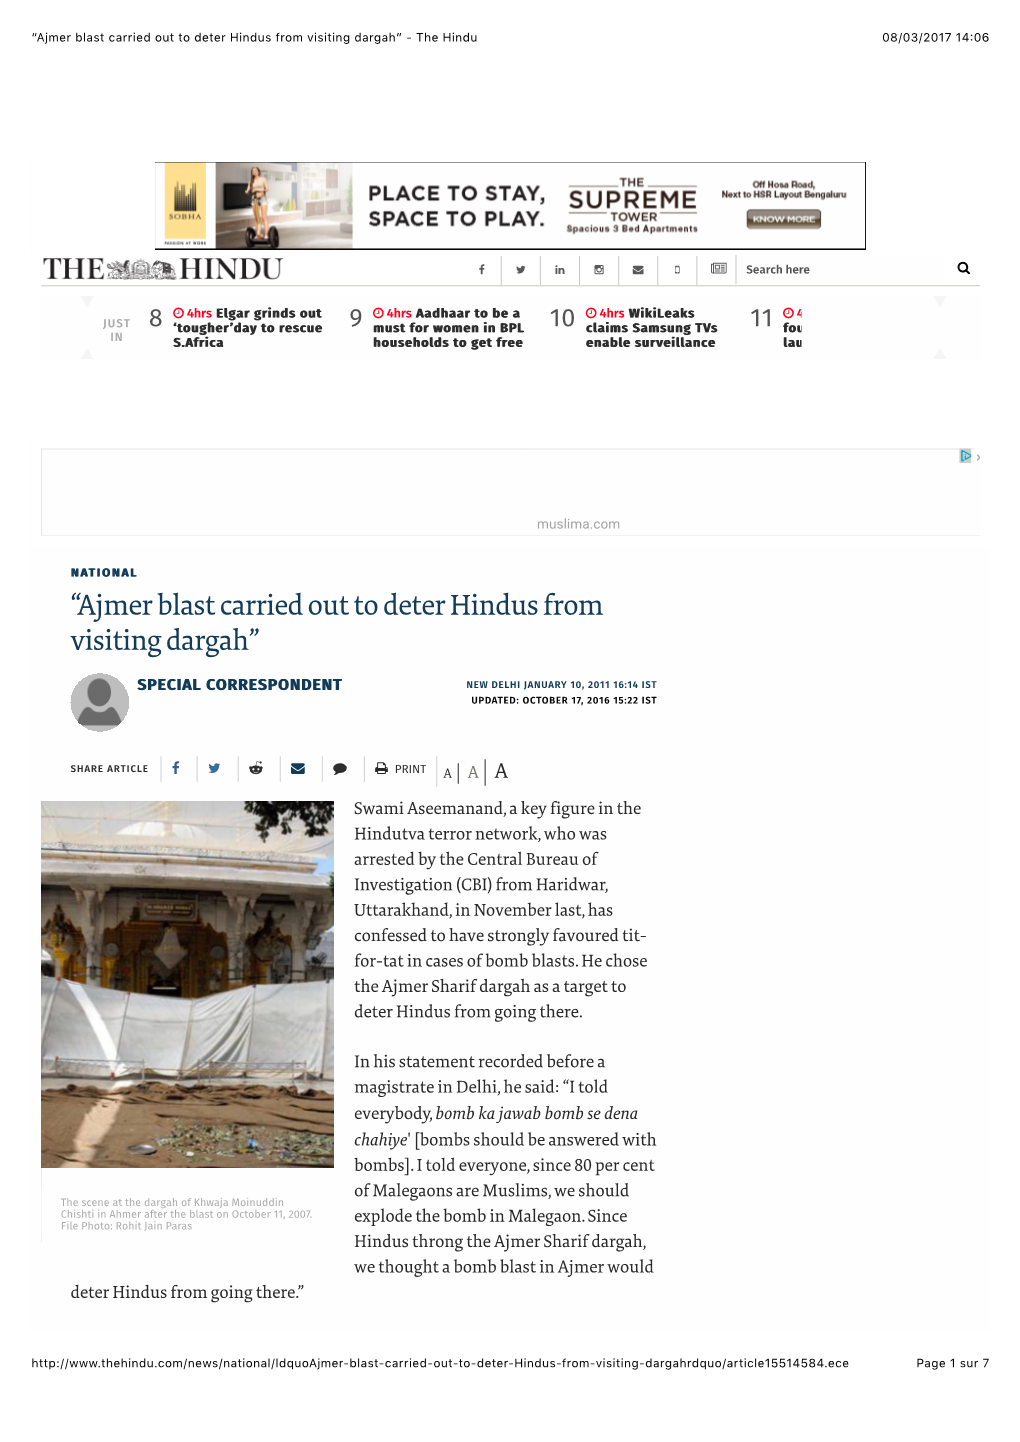 “Ajmer Blast Carried out to Deter Hindus from Visiting Dargah” - the Hindu 08/03/2017 14�06